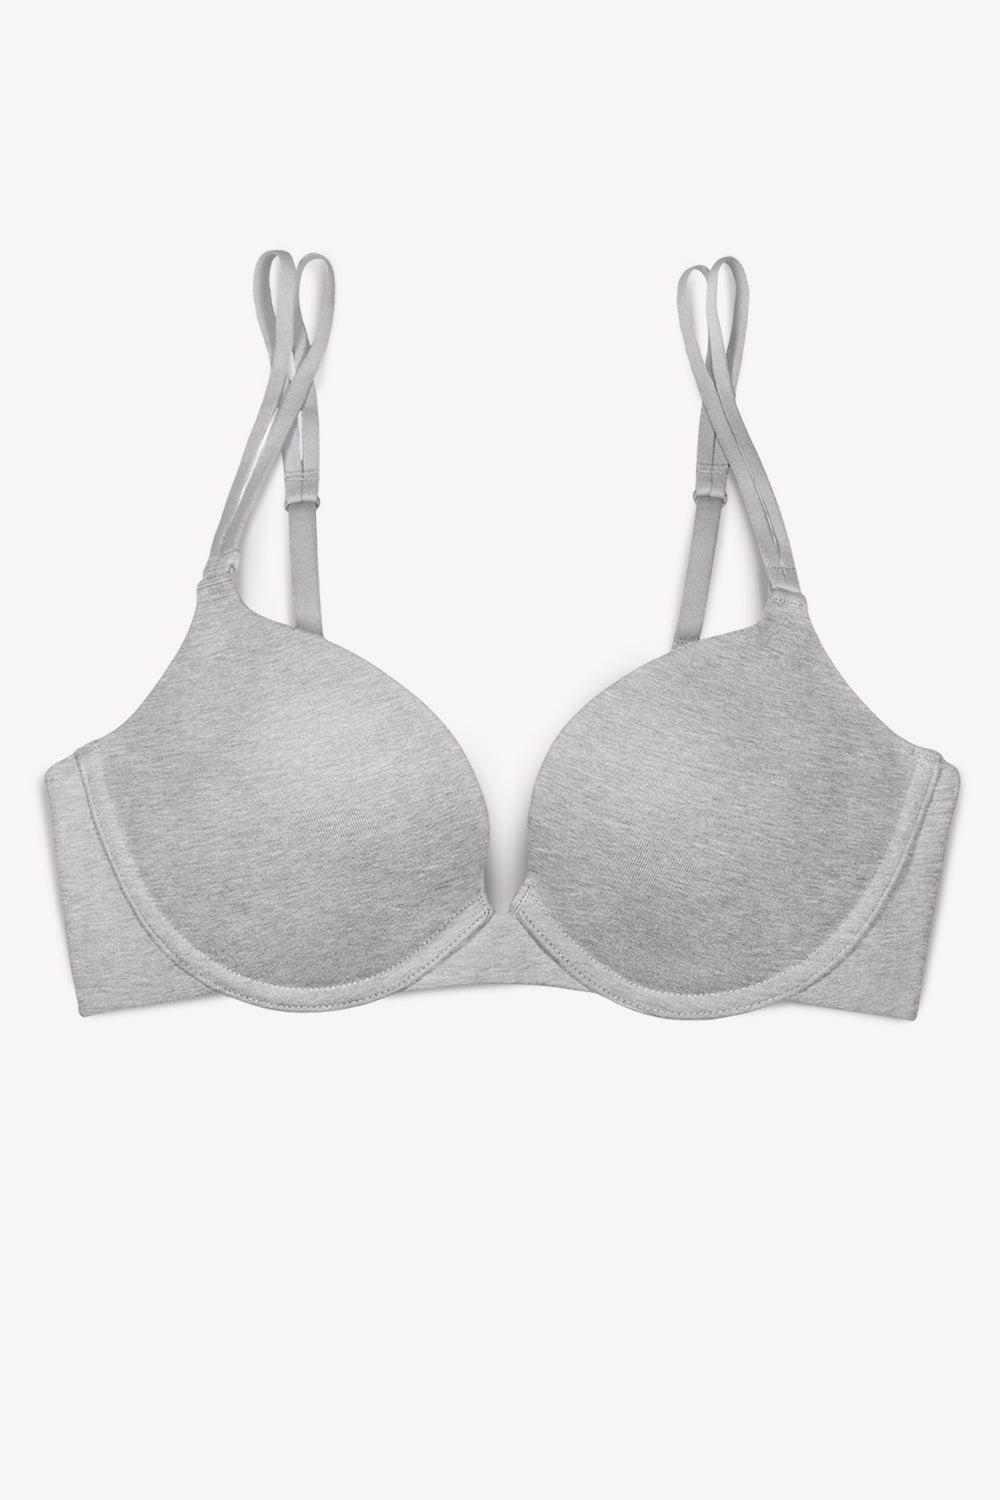 HIGH STREET light padded push-up bra Available in size 40D 🔥🔥🔥🔥🔥 The  fit is great cos it pack the excess boobs at the side